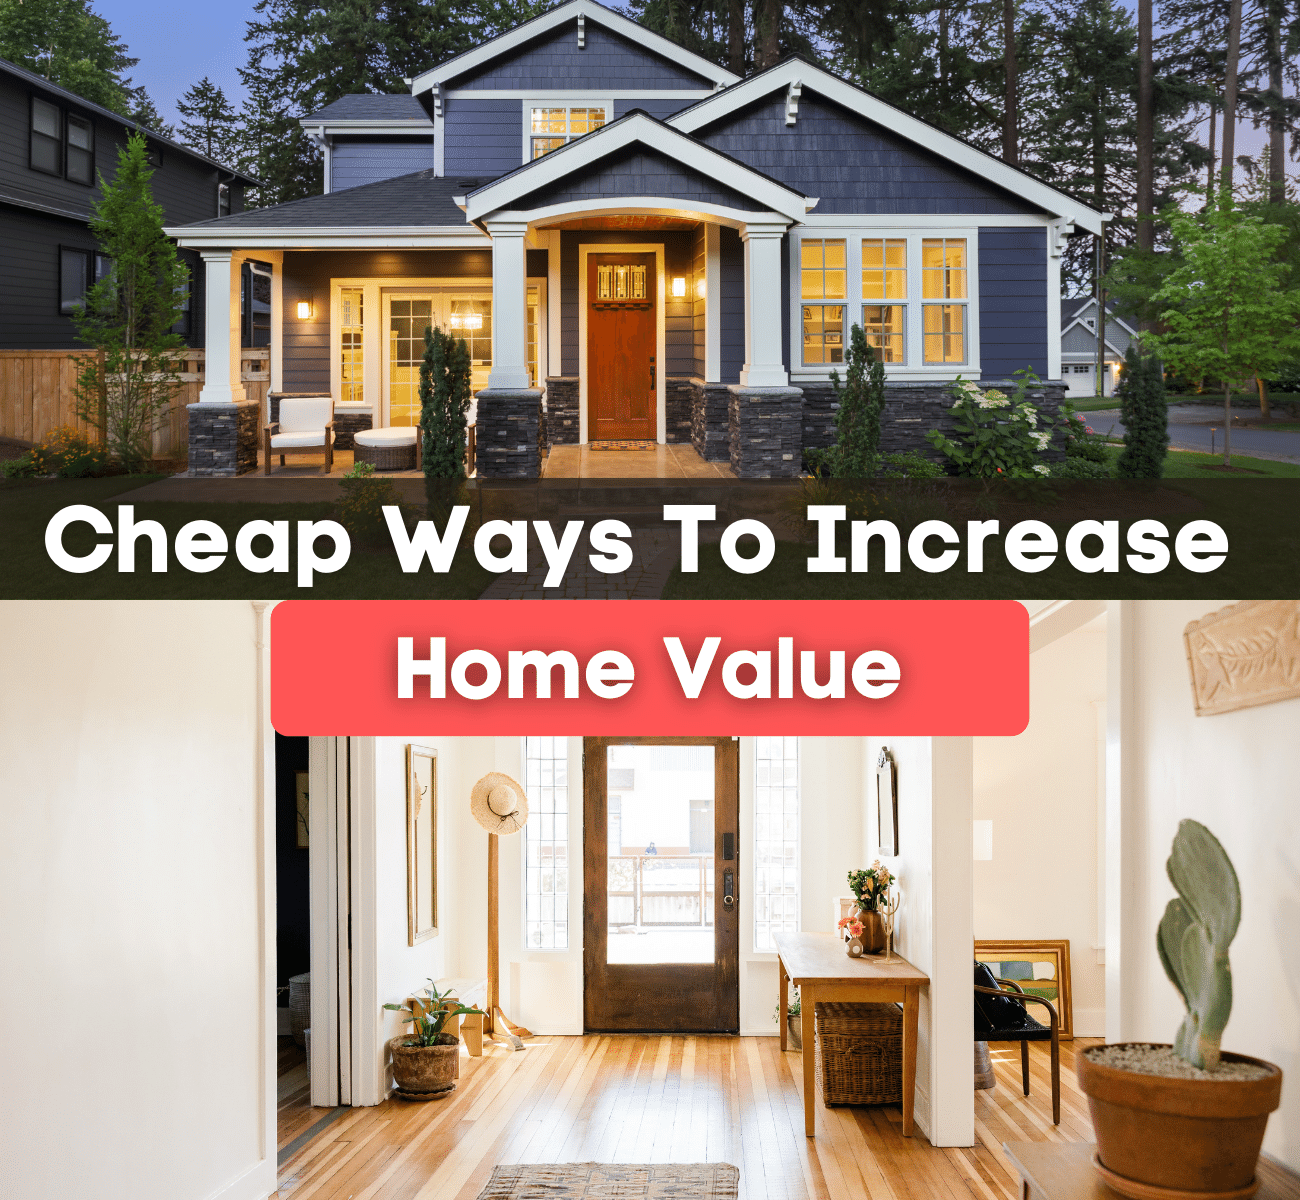 cheap ways to increase home value - exterior and interior of a home